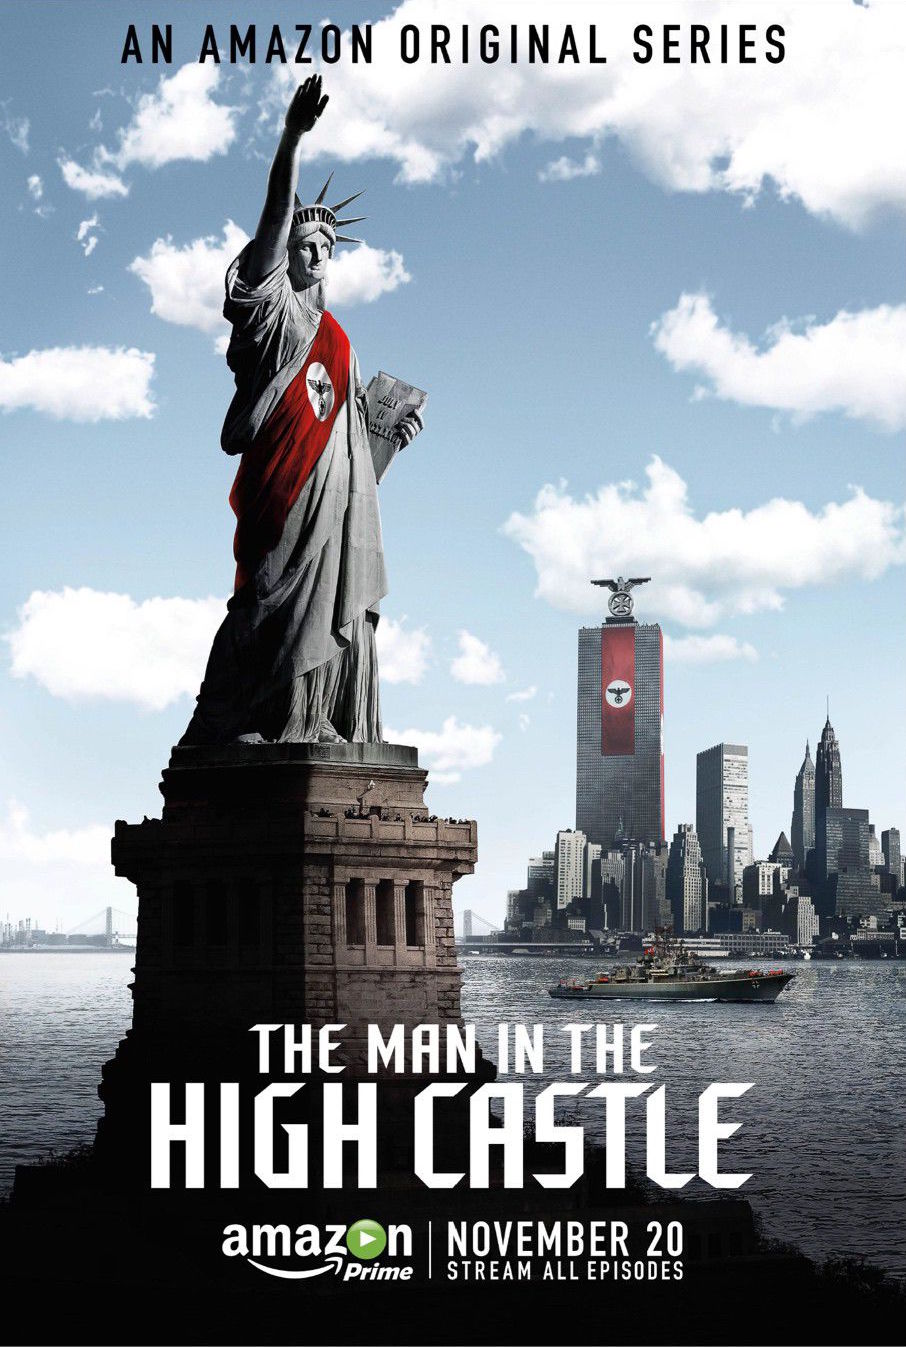 the man the high castle